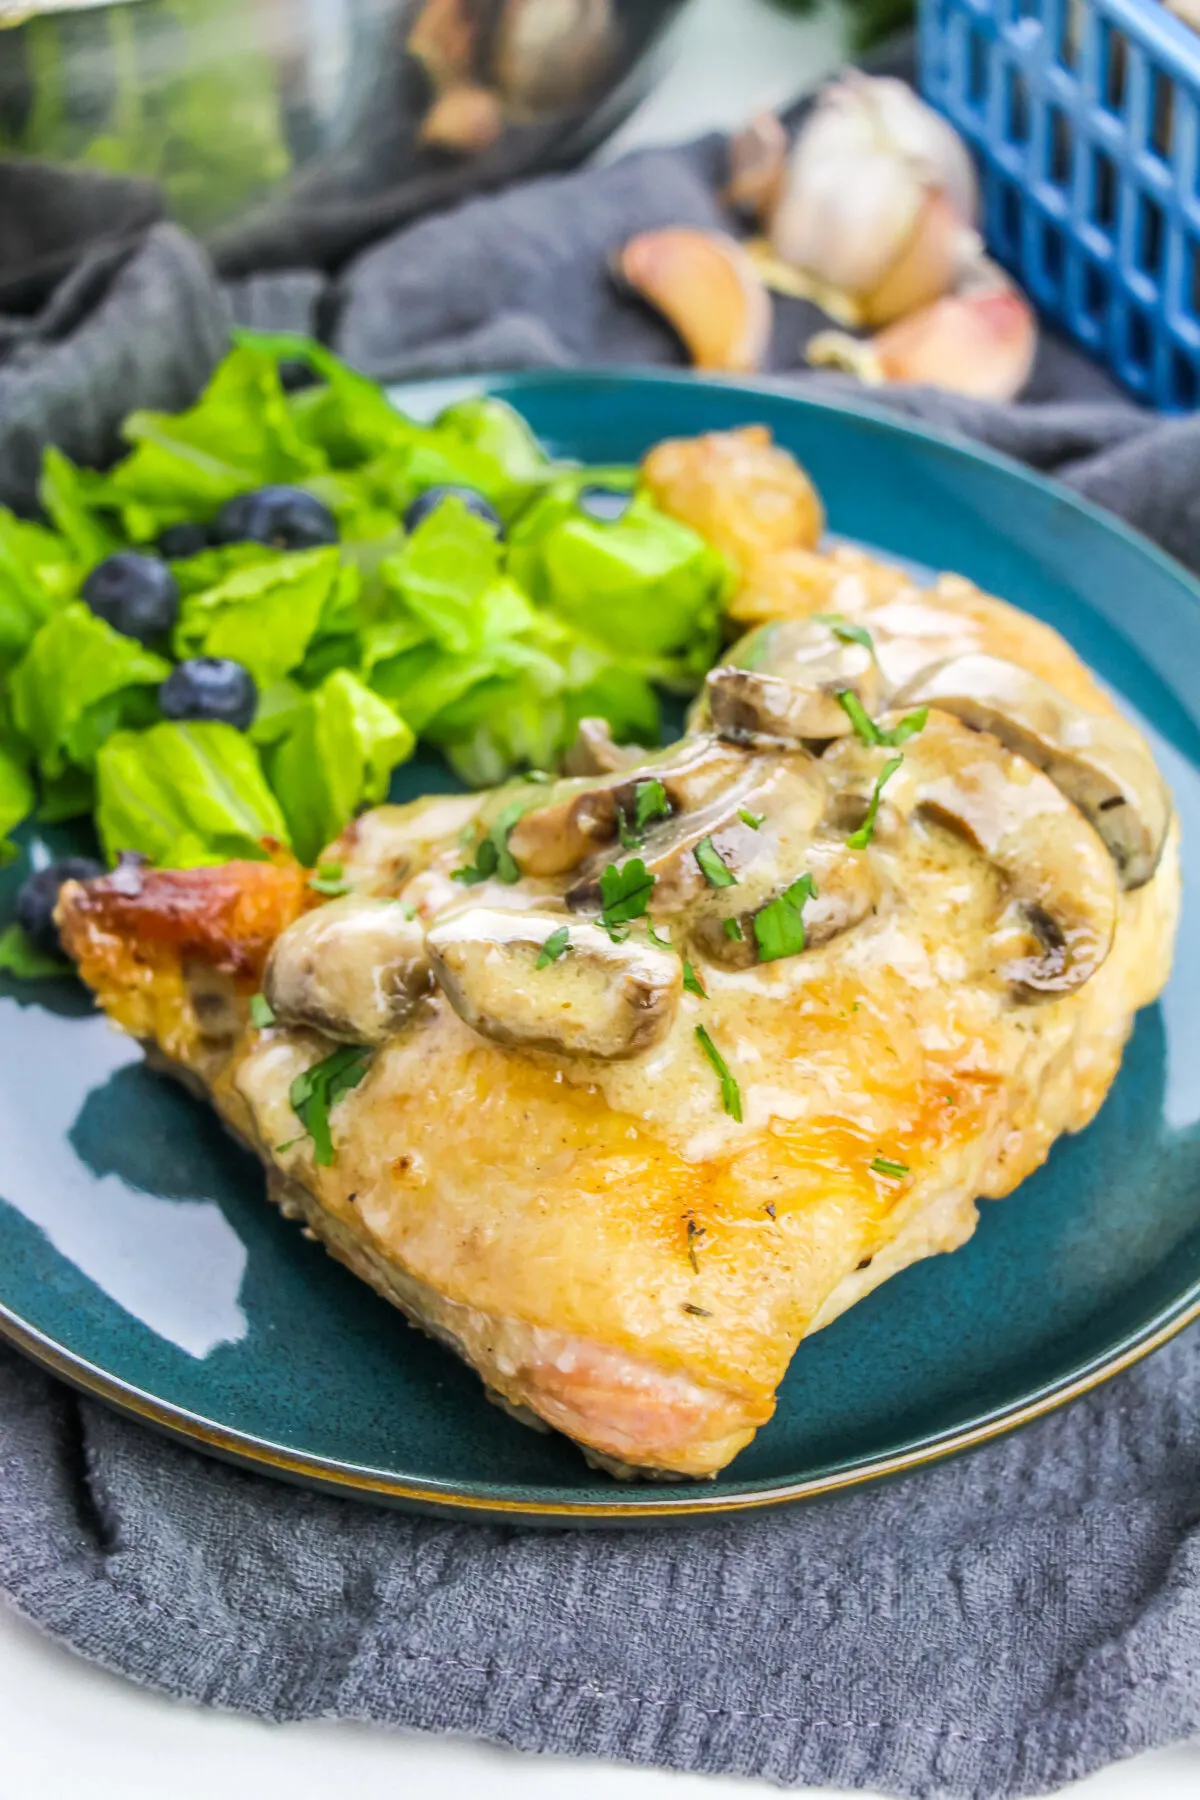 This creamy, delicious chicken with mushroom sauce is made from scratch. Learn how to make this classic comfort food with no canned soup.